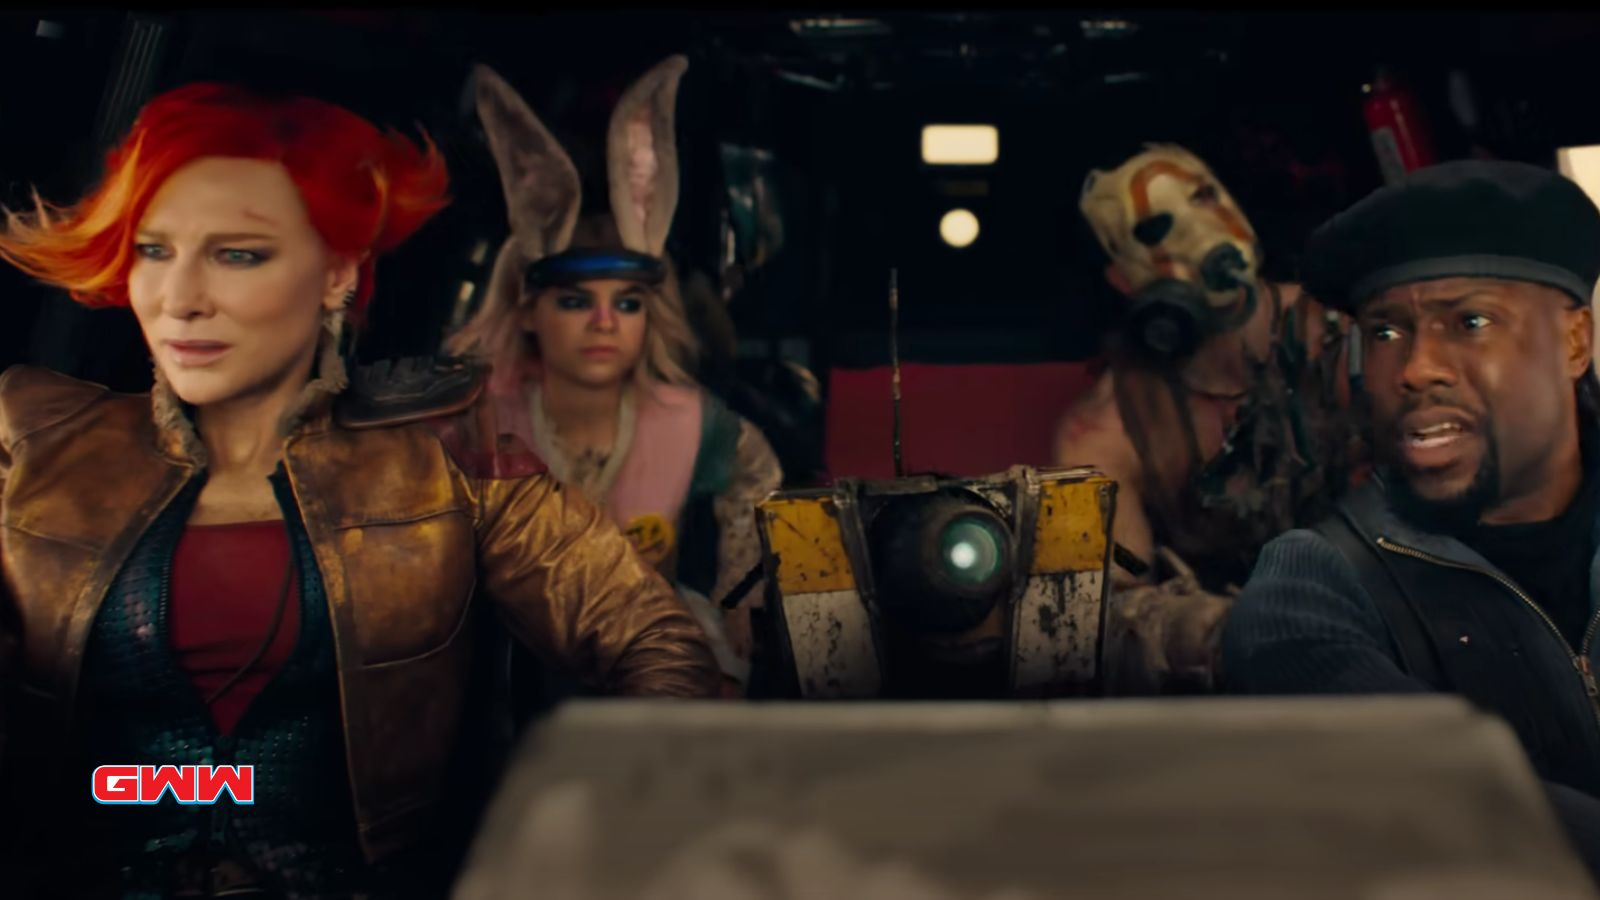 Roland, Lilith, Krieg, and Tiny Tina in a car ride, Borderlands movie